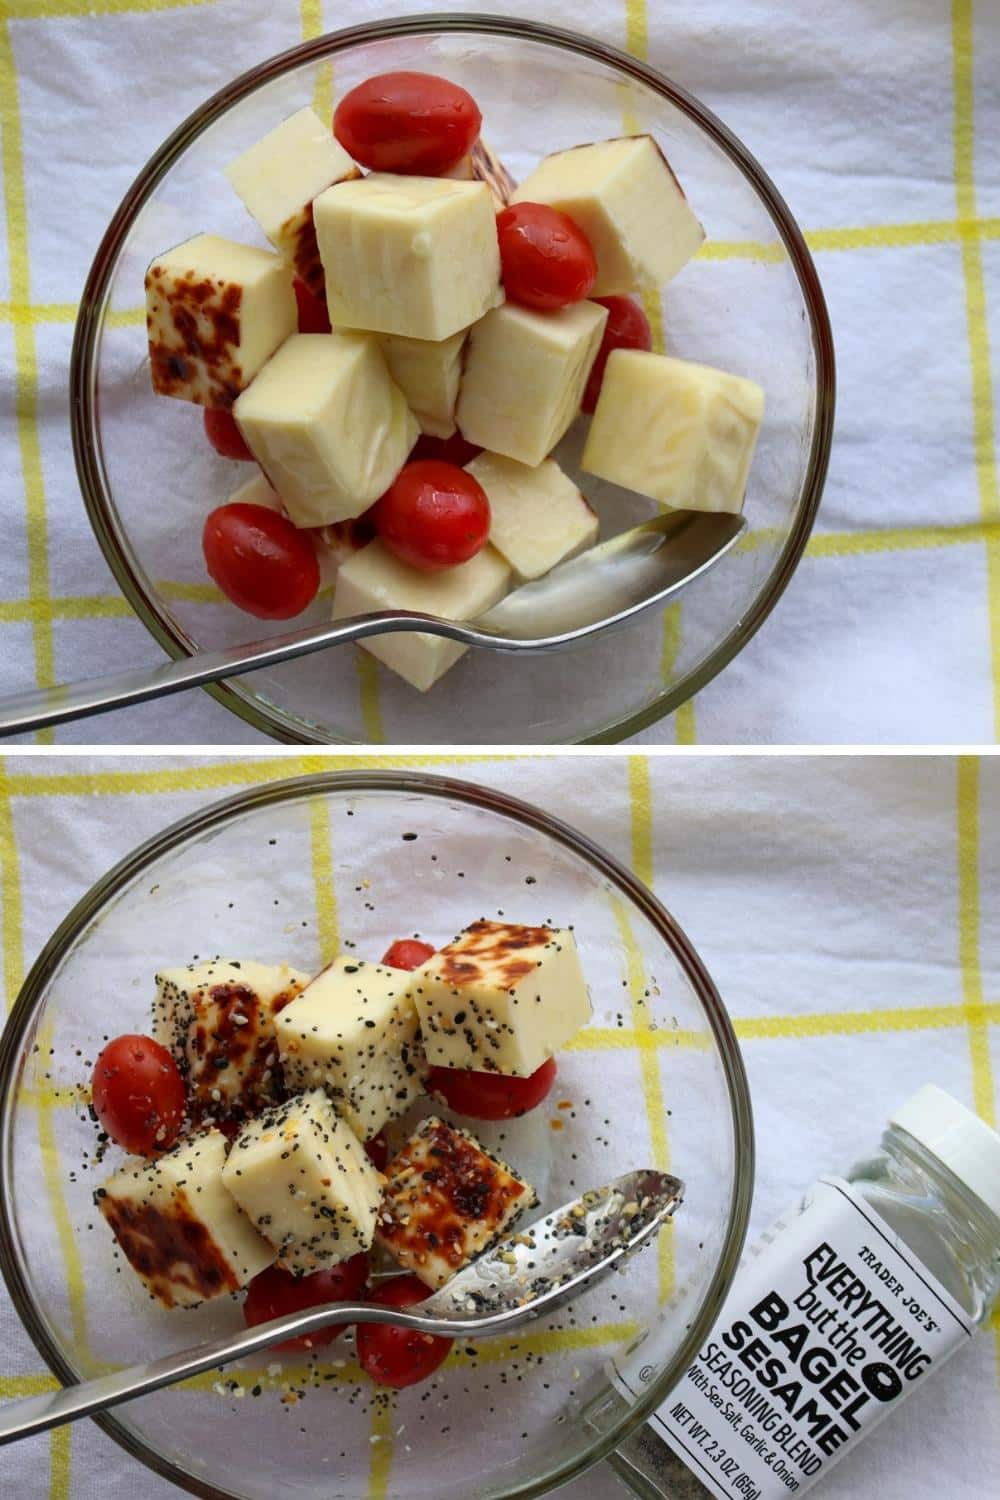 two photos showing cubed bread cheese and halved cherry tomatoes in bowls with olive oil and everything bagel seasoning